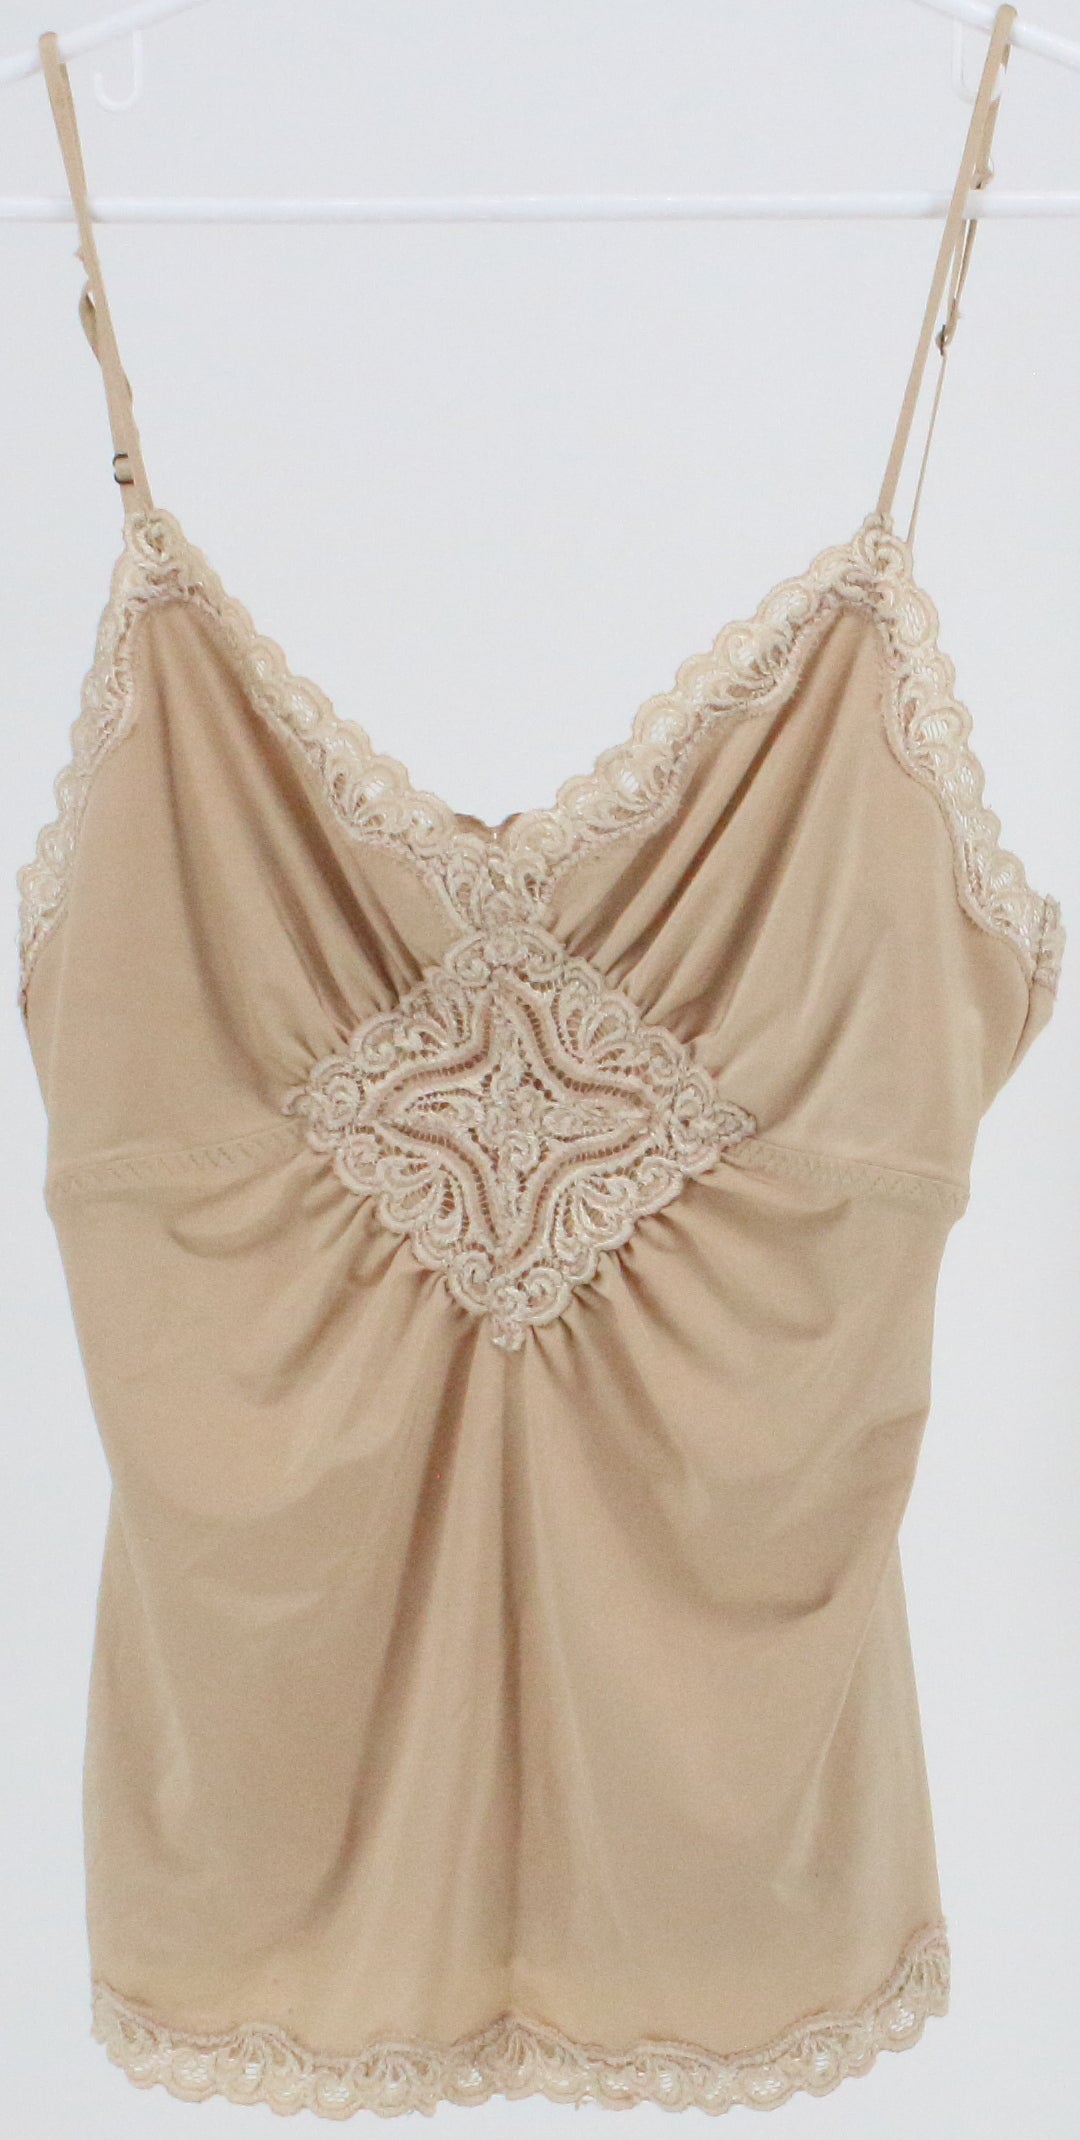 The Limited Beige Camisole